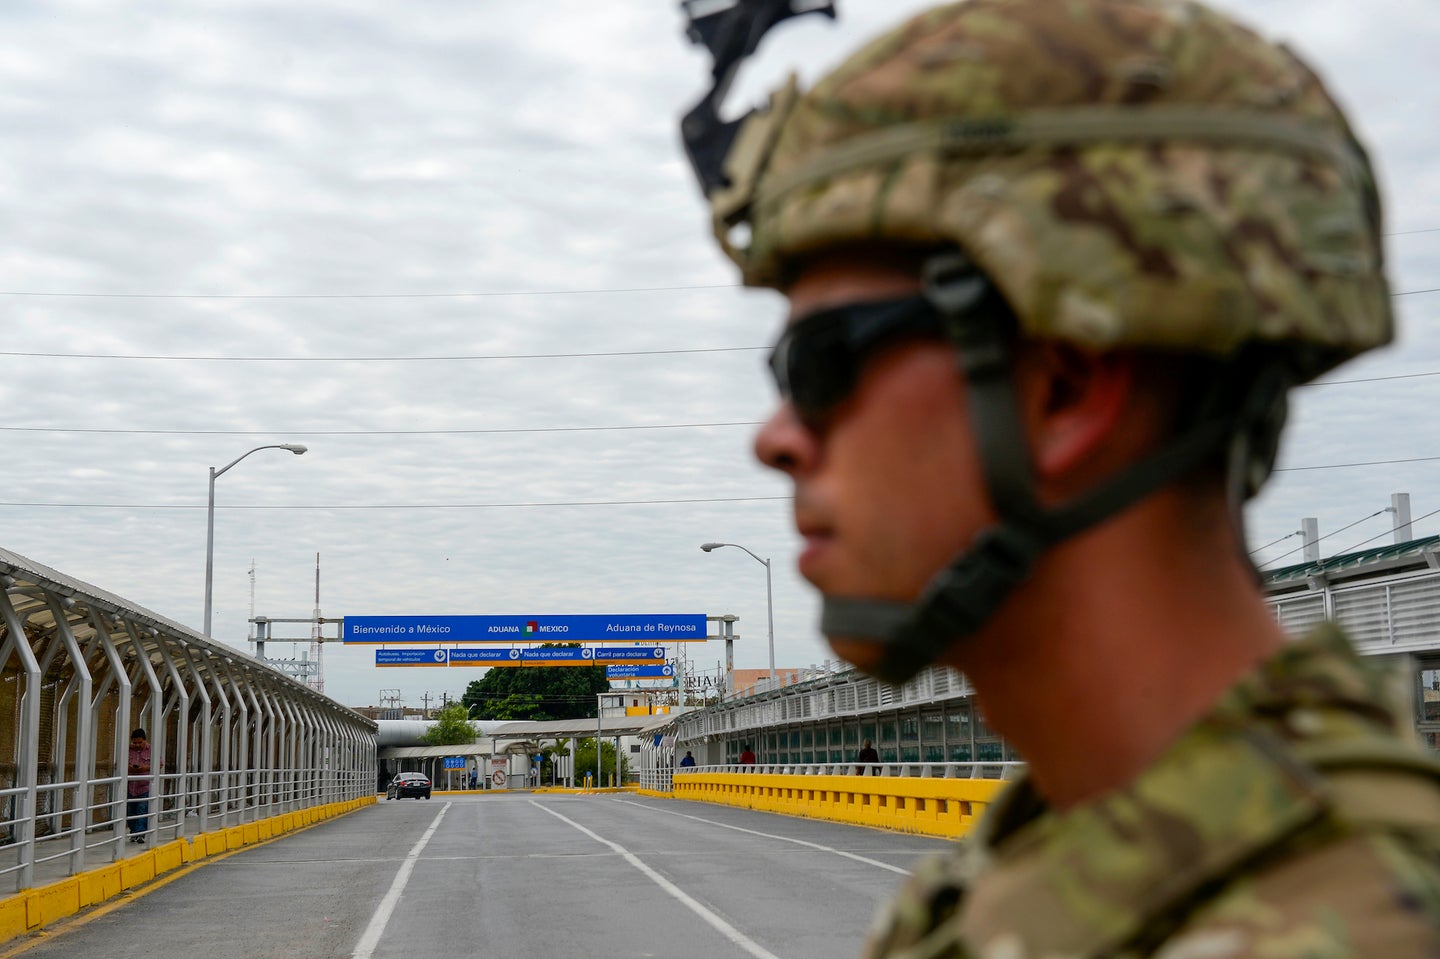 Soldiers from the 97th Military Police Brigade, and 41st Engineering Company, Fort Riley, KS., work along side with U.S. Customs and Border Protection at the Hidalgo, TX., port of entry, applying 300 meters of concertina wire along the Mexico border in support of Operation FAITHFUL PATRIOT November 2, 2018. Soldiers will provide a range of support including planning assistance, engineering support, equipment and resources to assist the Department of Homeland Security along the southwest border.

(U.S. Air Force photo by SrA Alexandra Minor)